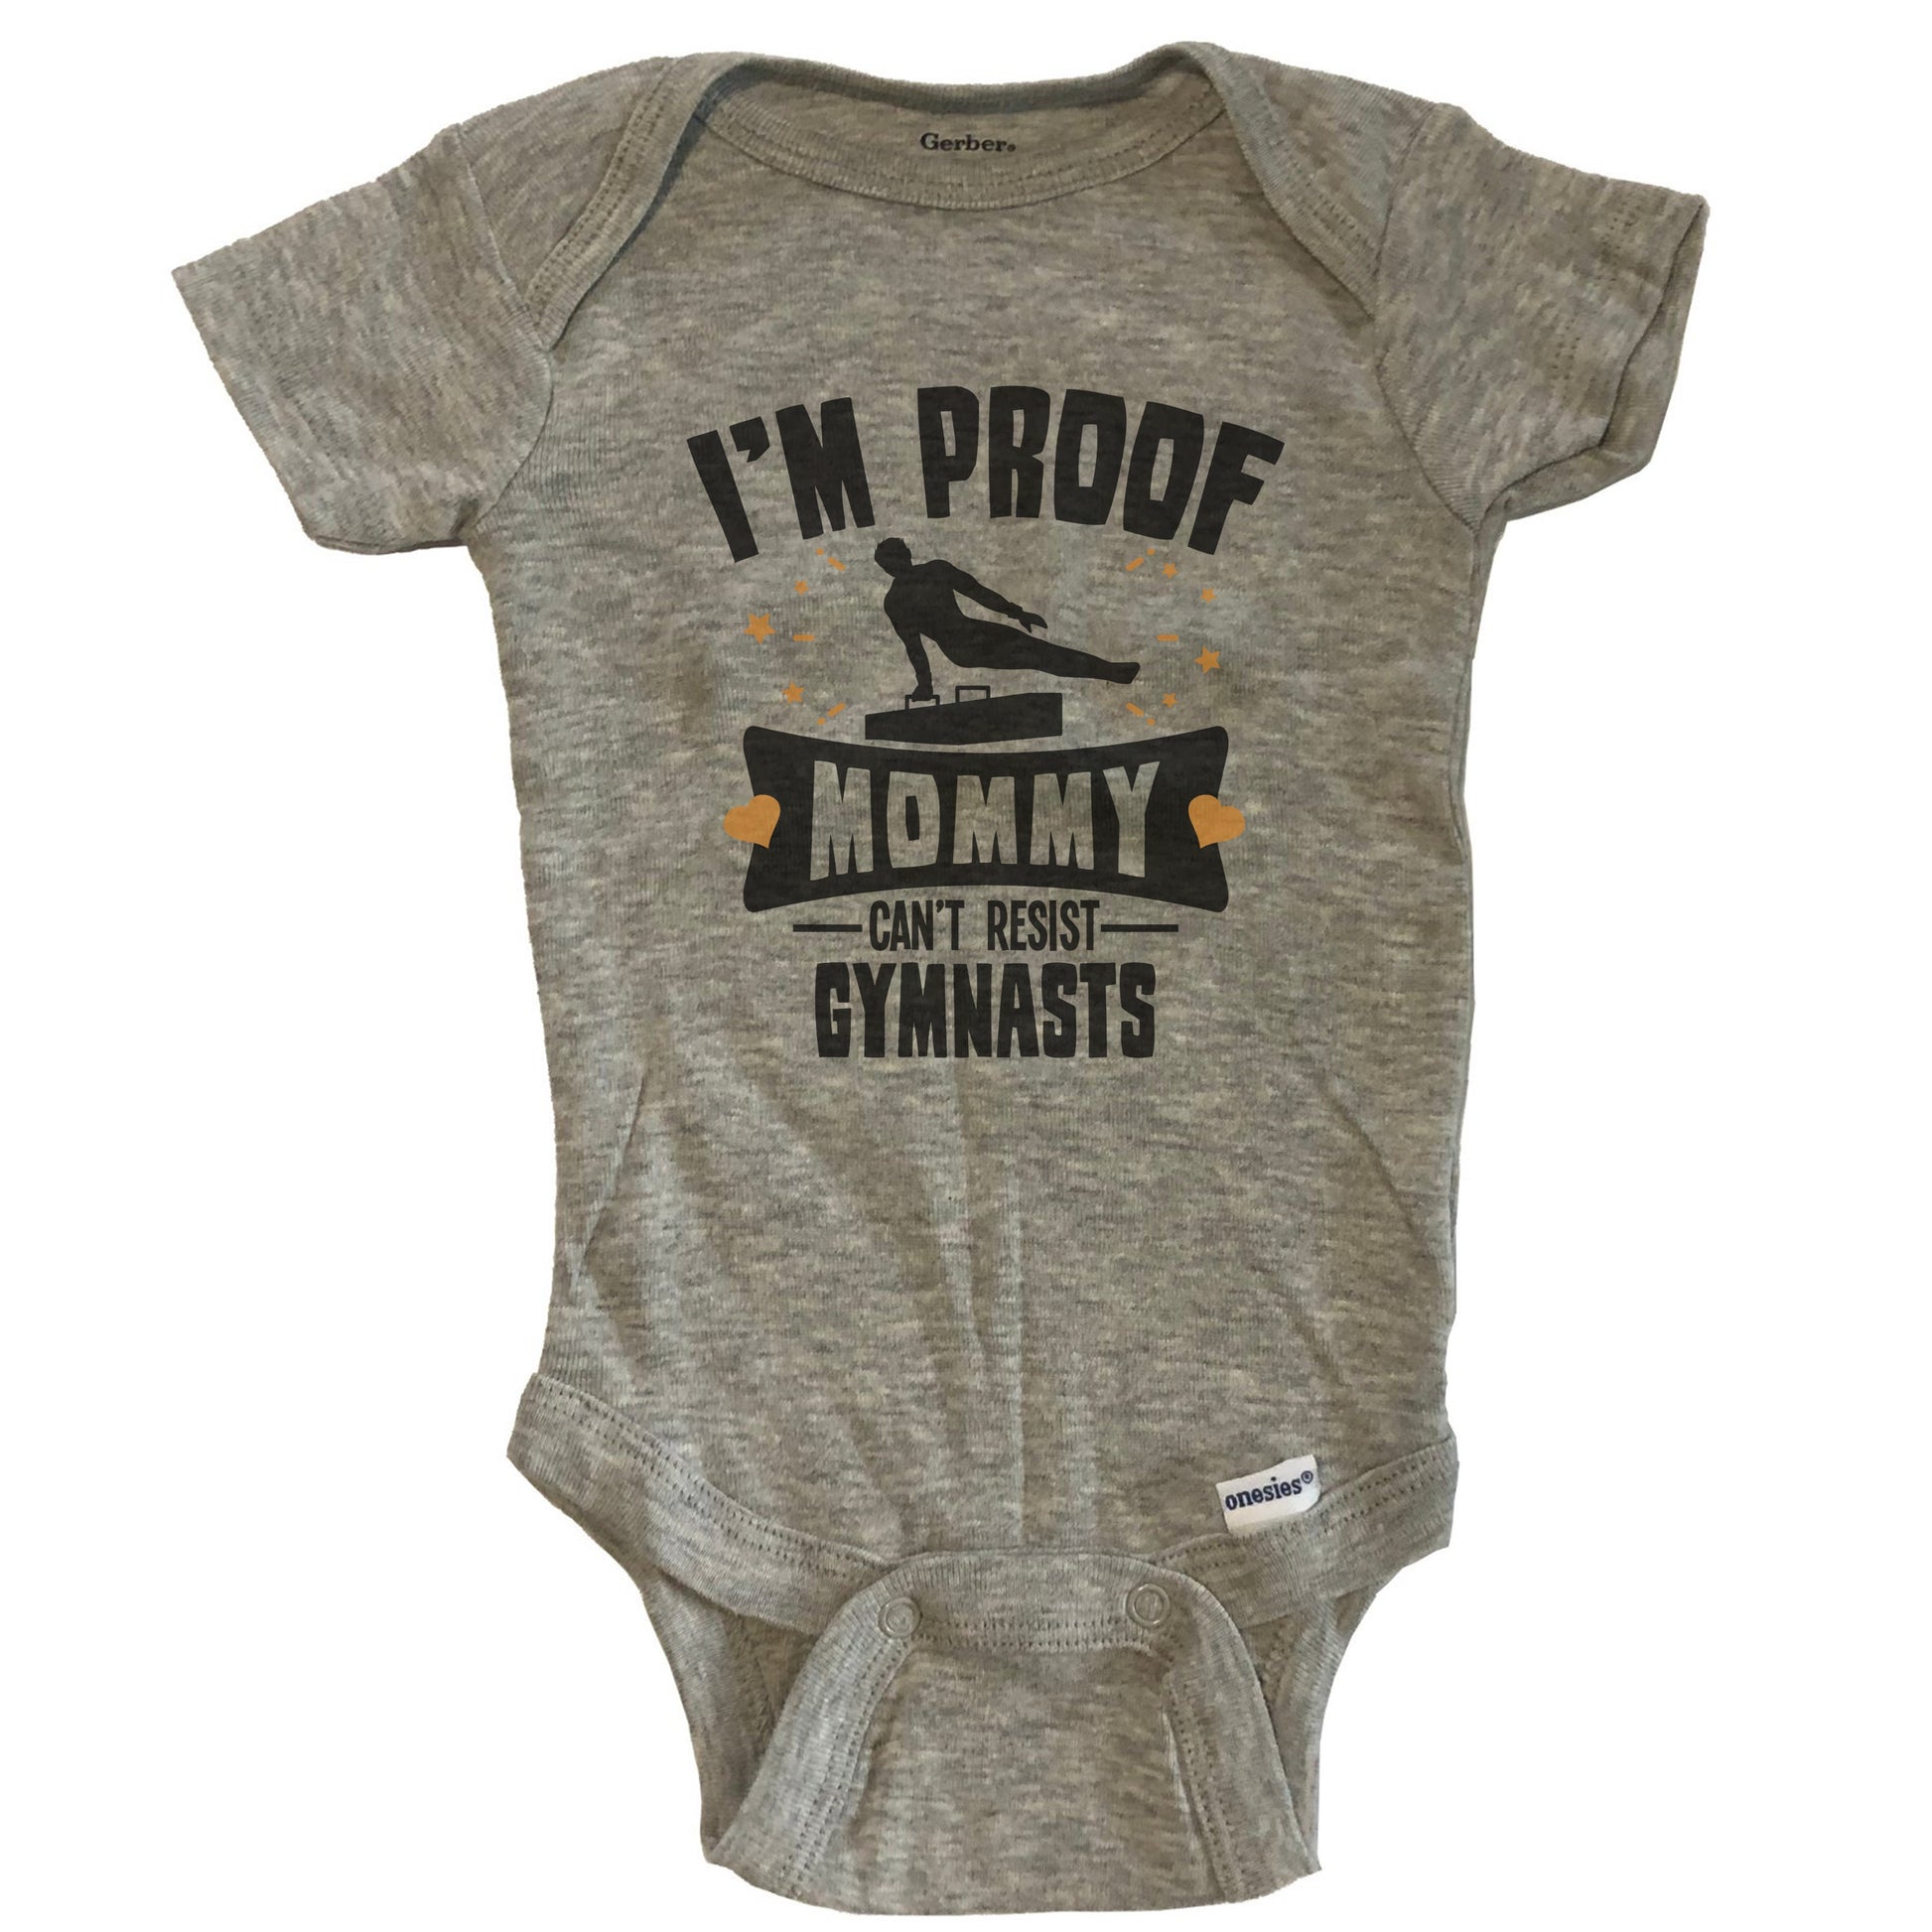 Funny Male Gymnast Onesie - I'm Proof Mommy Can't Resist Gymnasts Baby Bodysuit